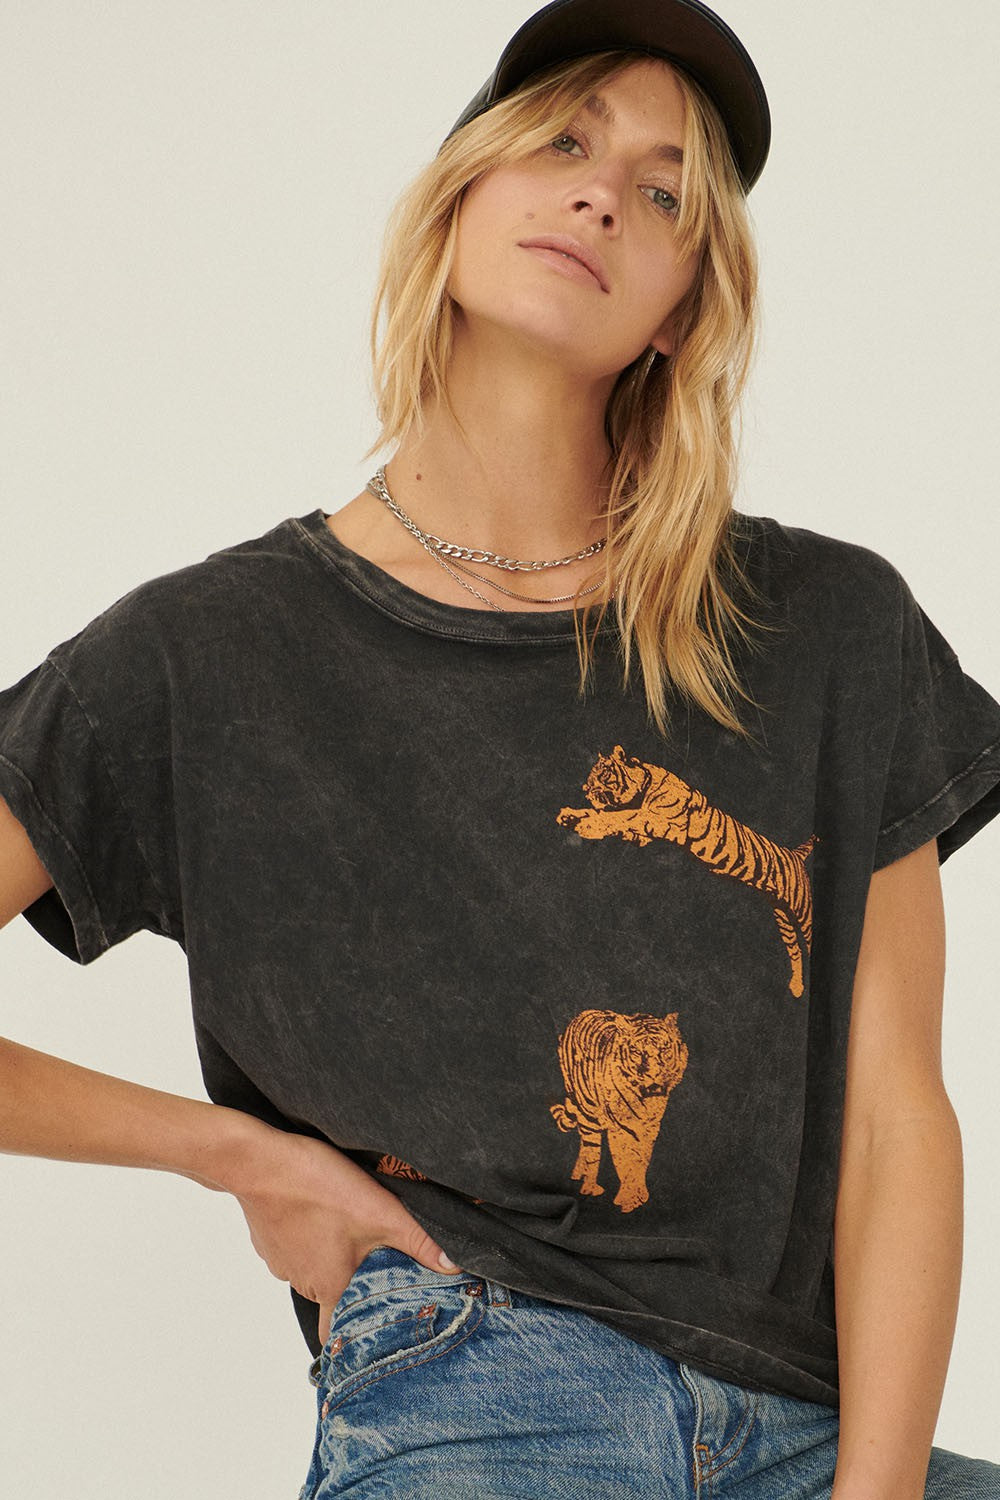 The Leaping Tiger Vintage Wash Tee